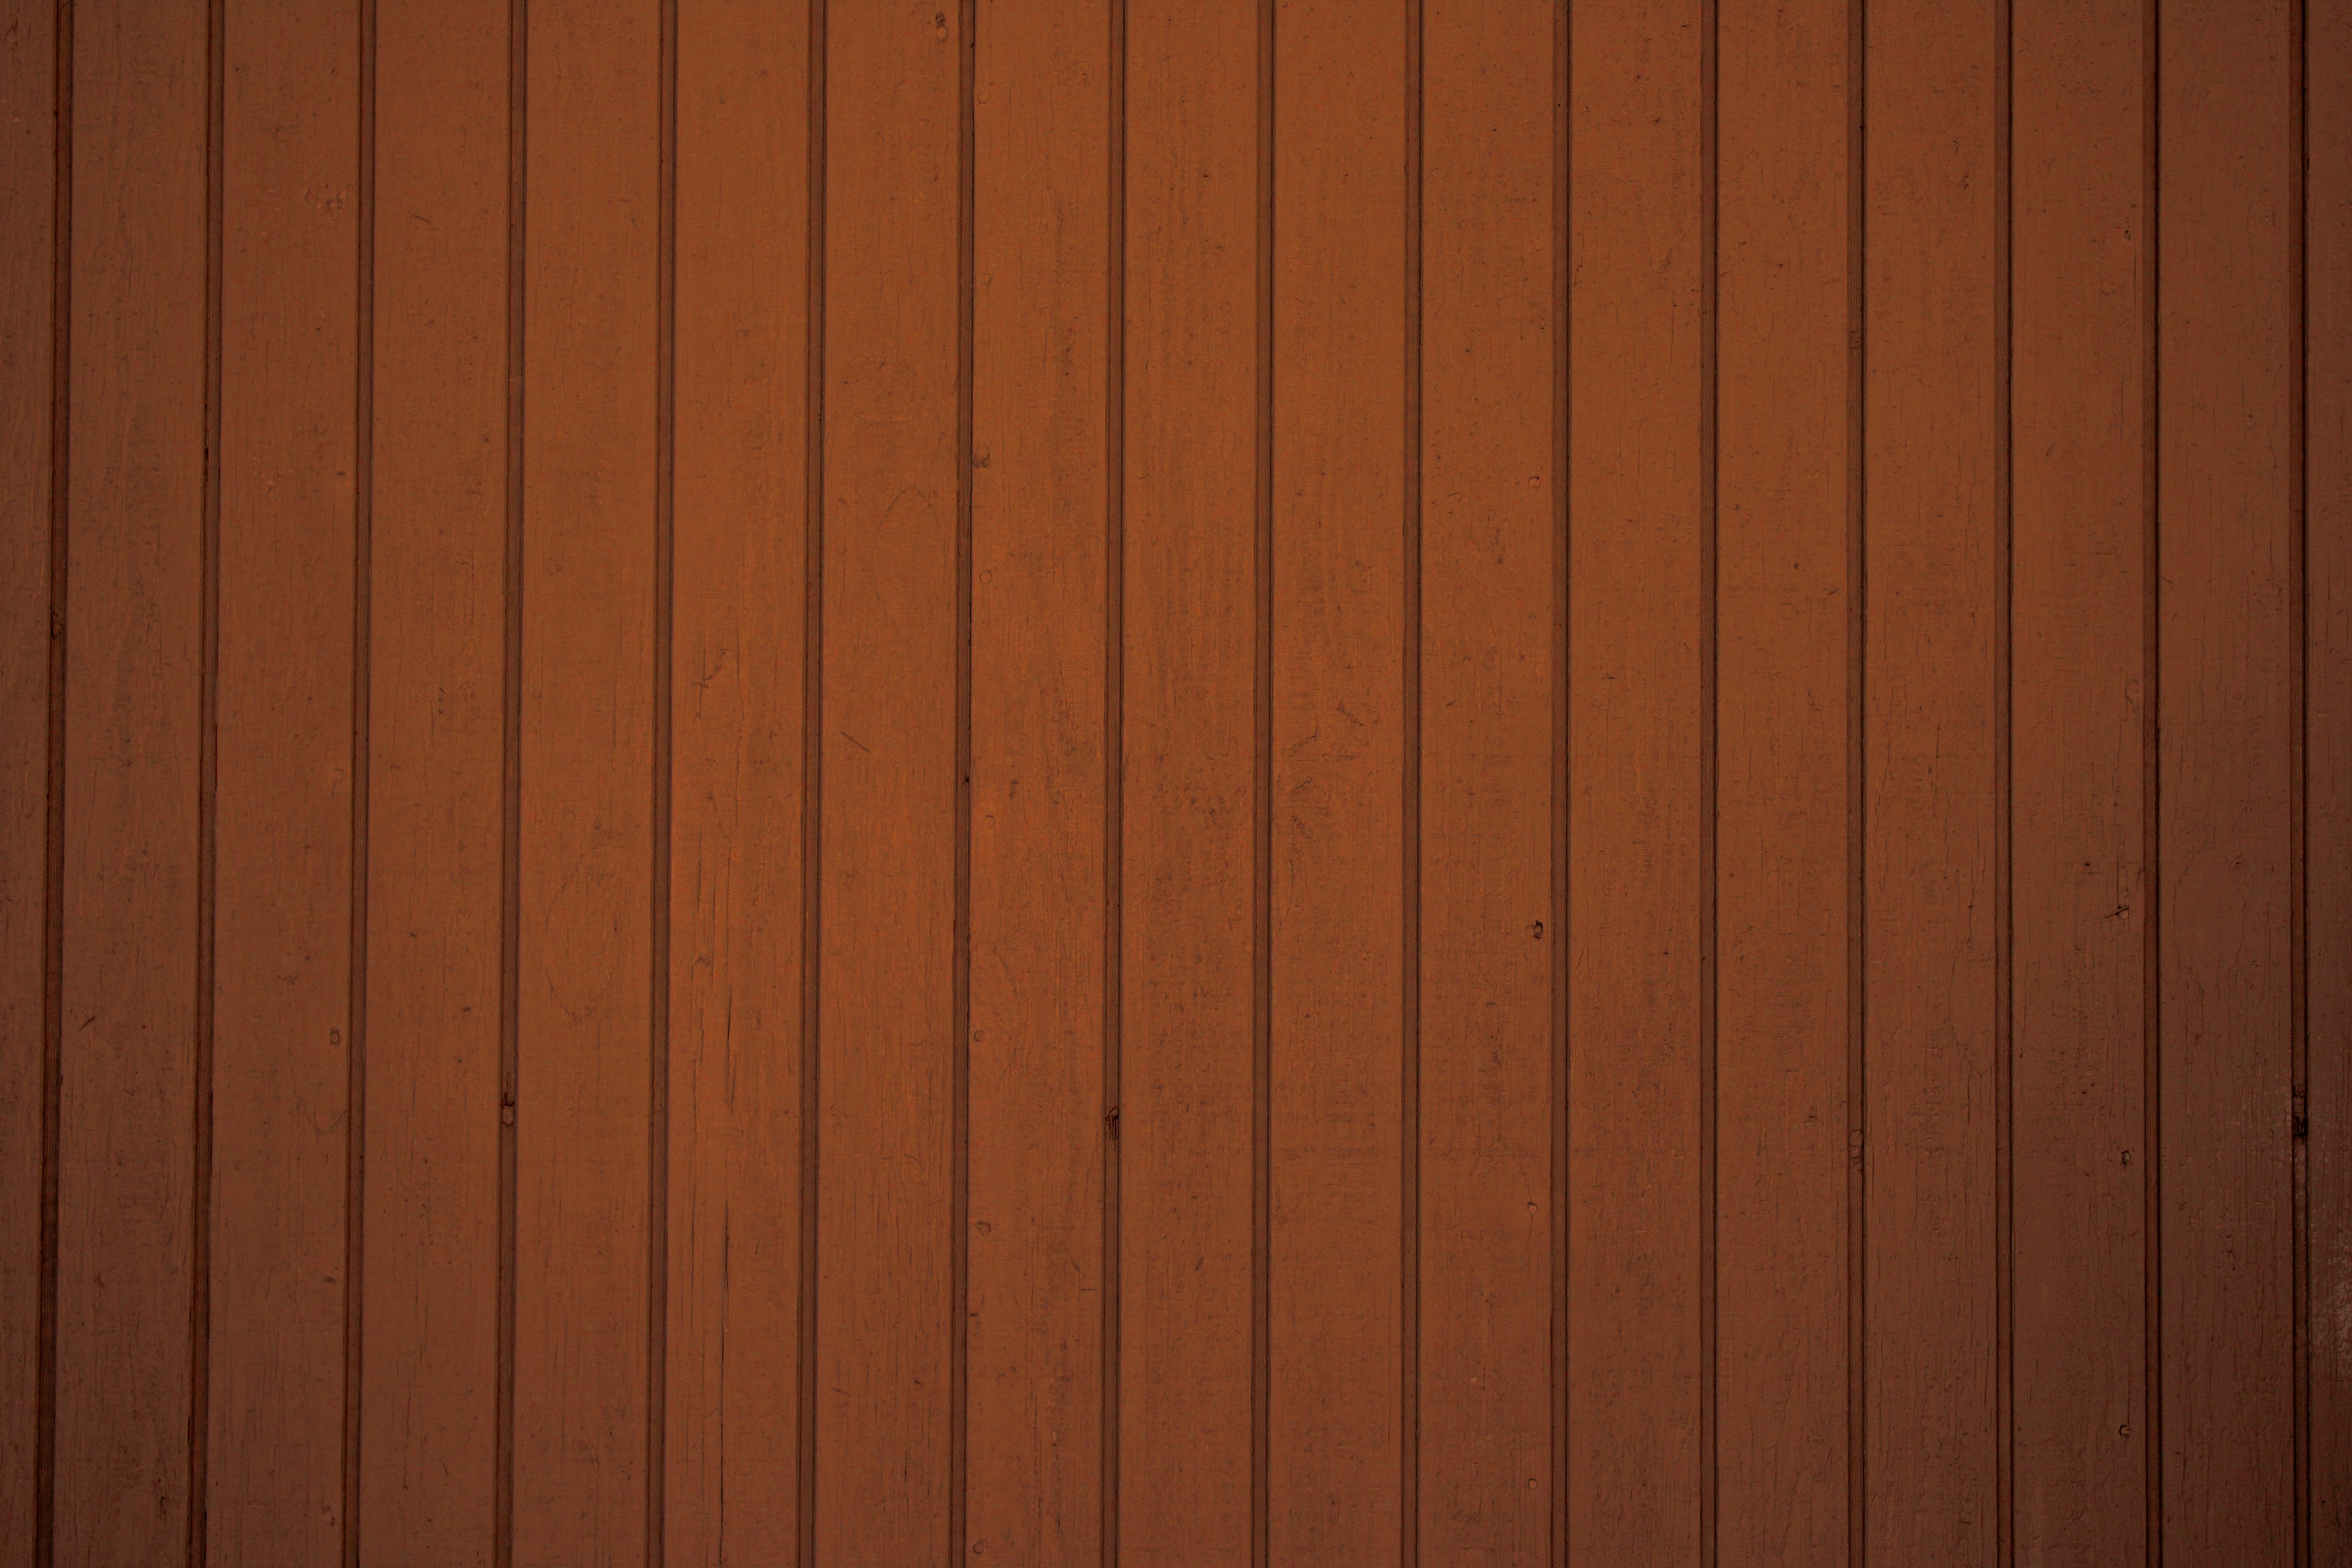 Dark Brown Vinyl Siding Textures Baby Knit And Love